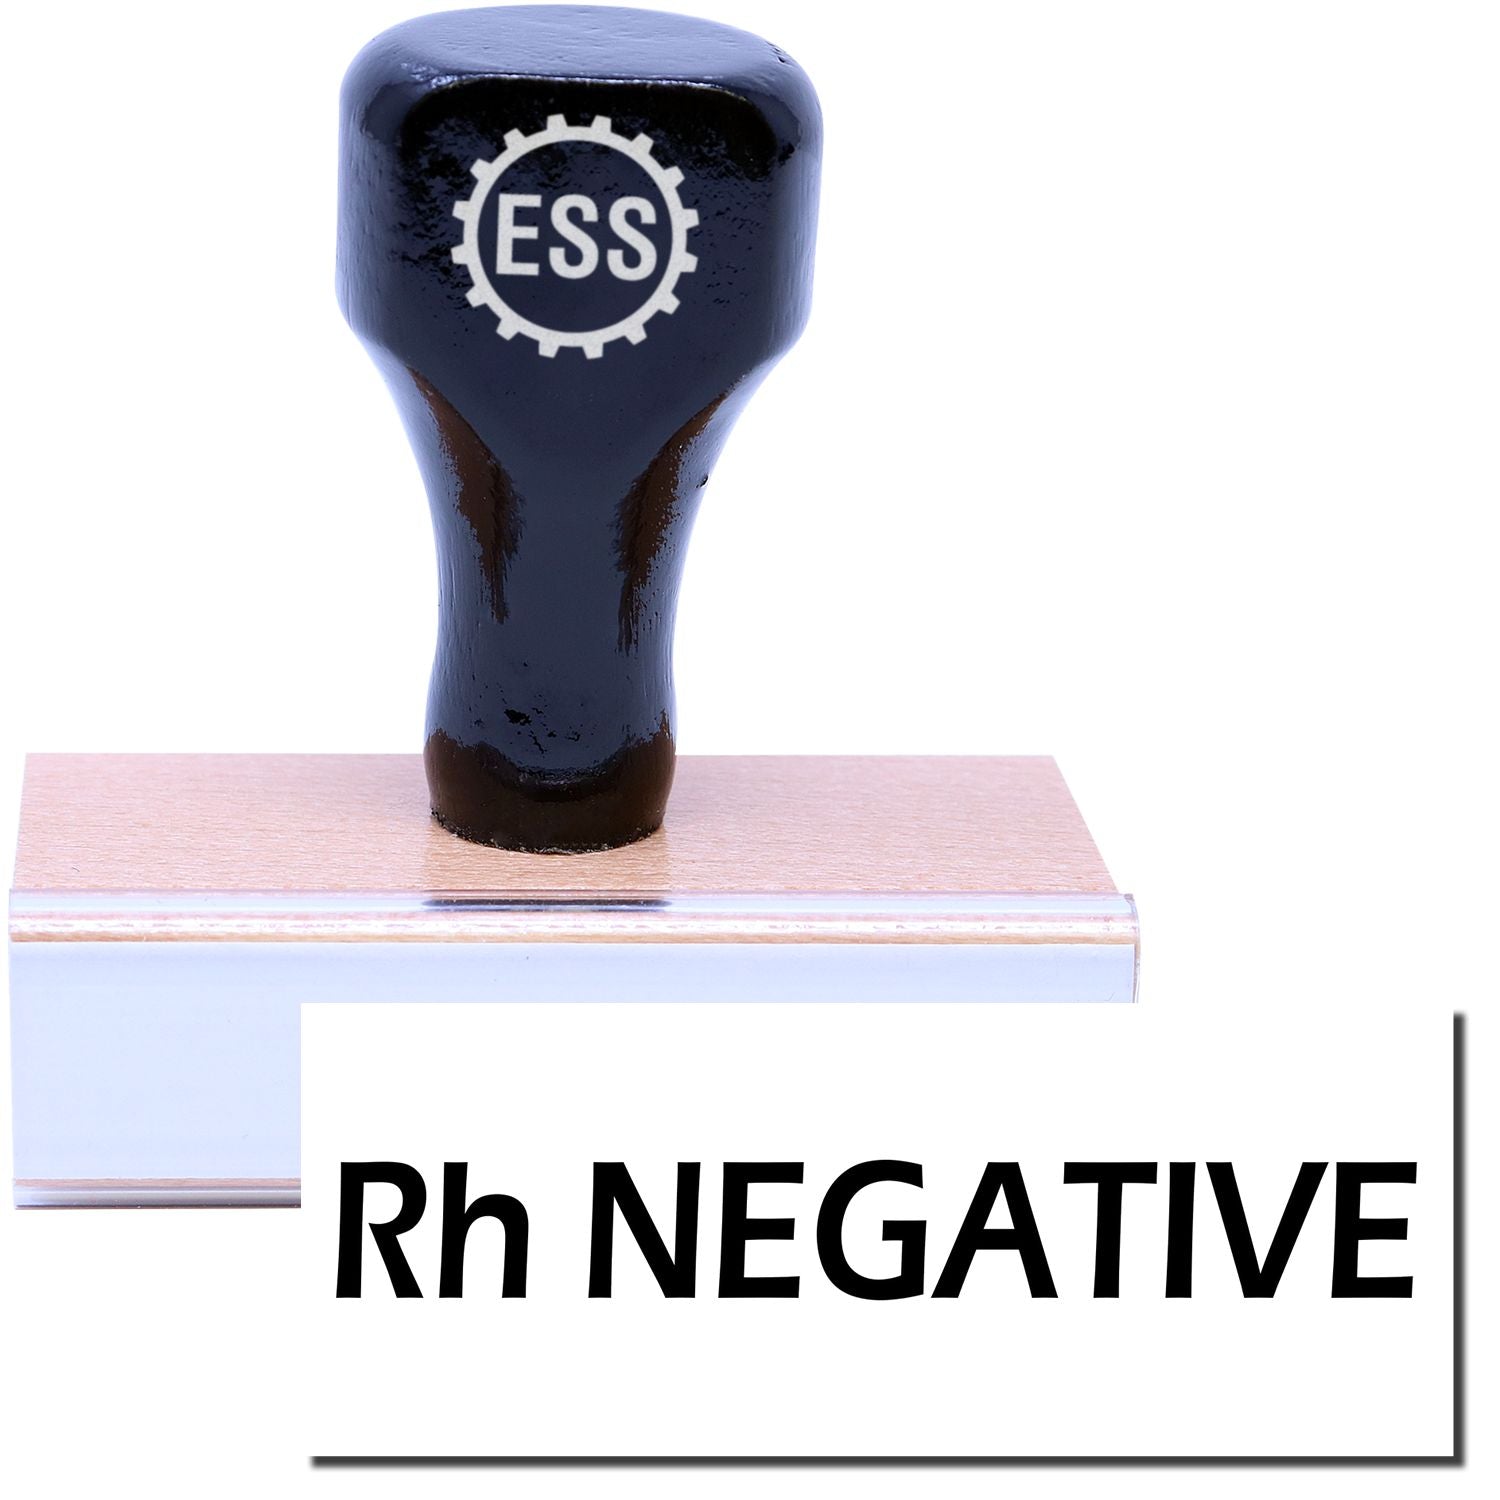 A stock office rubber stamp with a stamped image showing how the text "Rh NEGATIVE" is displayed after stamping.